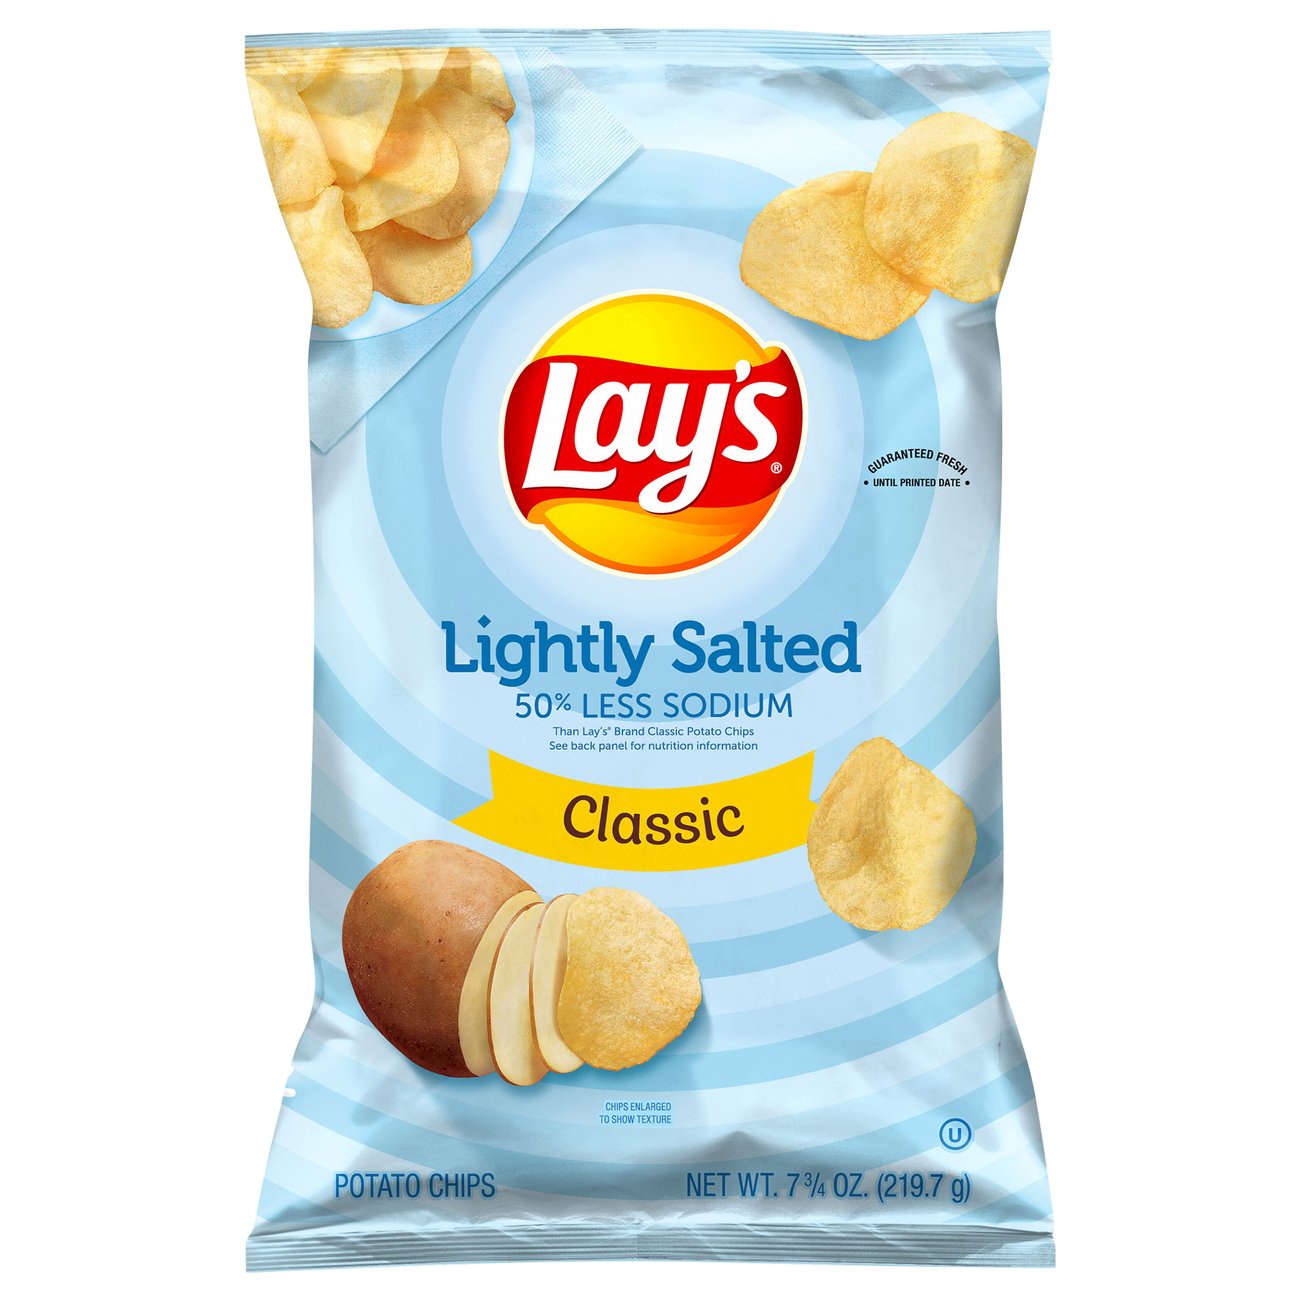 Lays Lightly Salted Classic Potato Chips Shop Chips At H E B